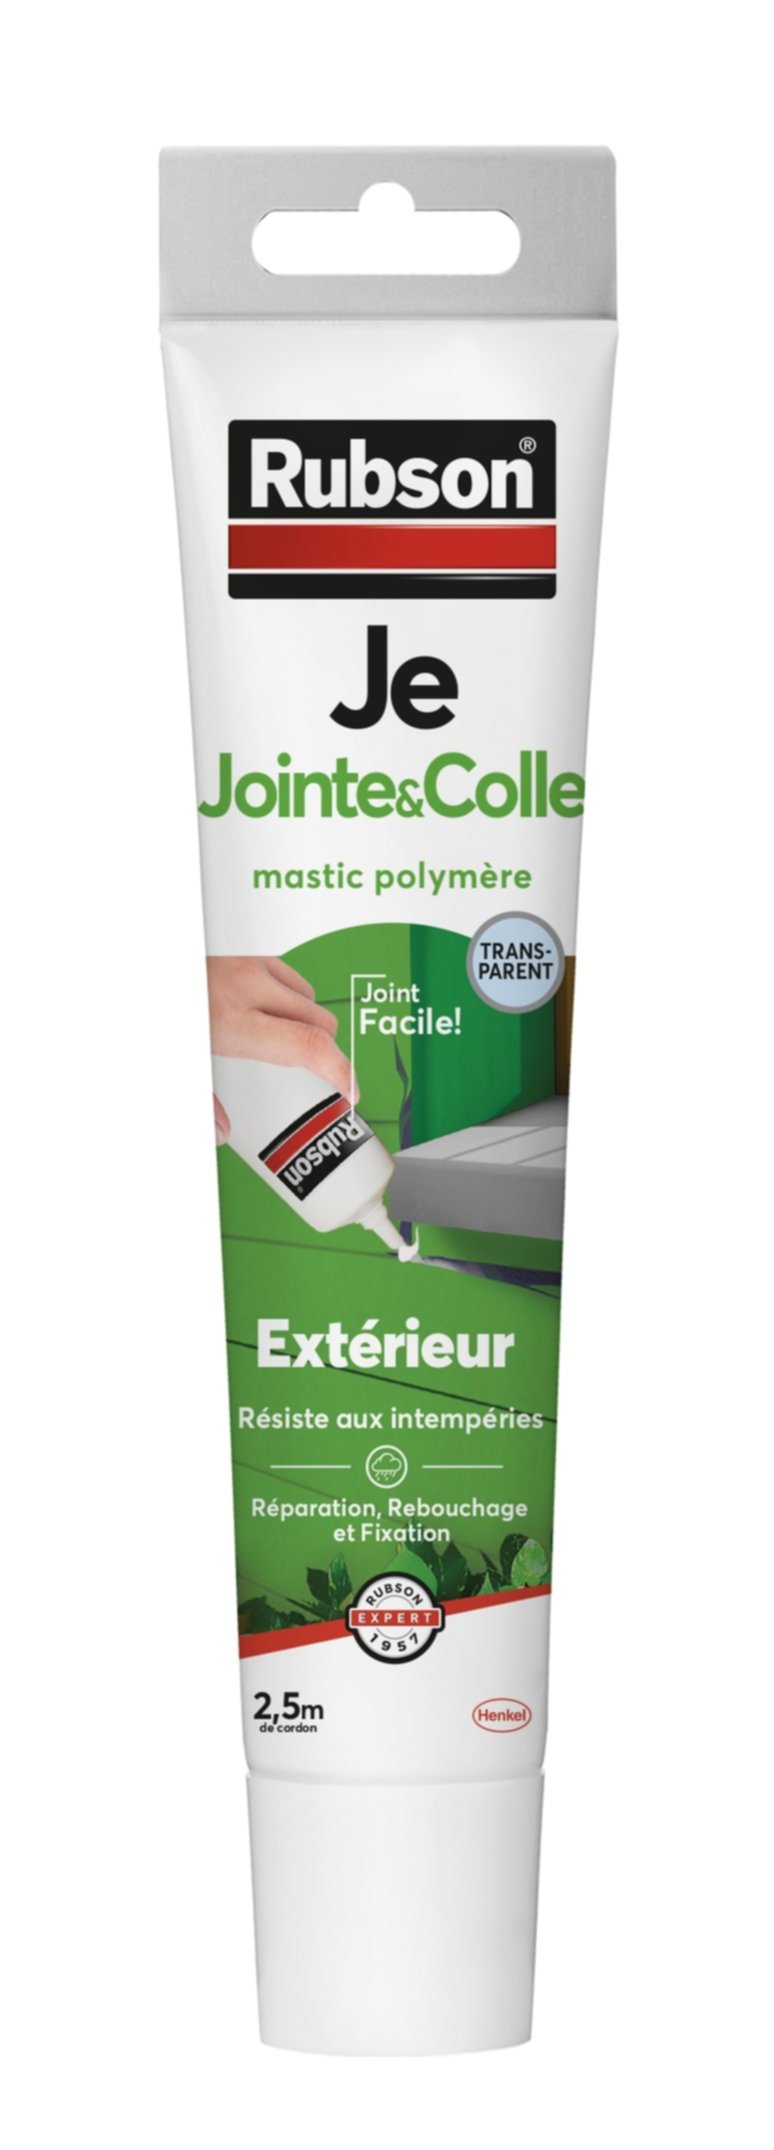 Mastic Polymère Jointe&Colle 50ml Transparent - RUBSON